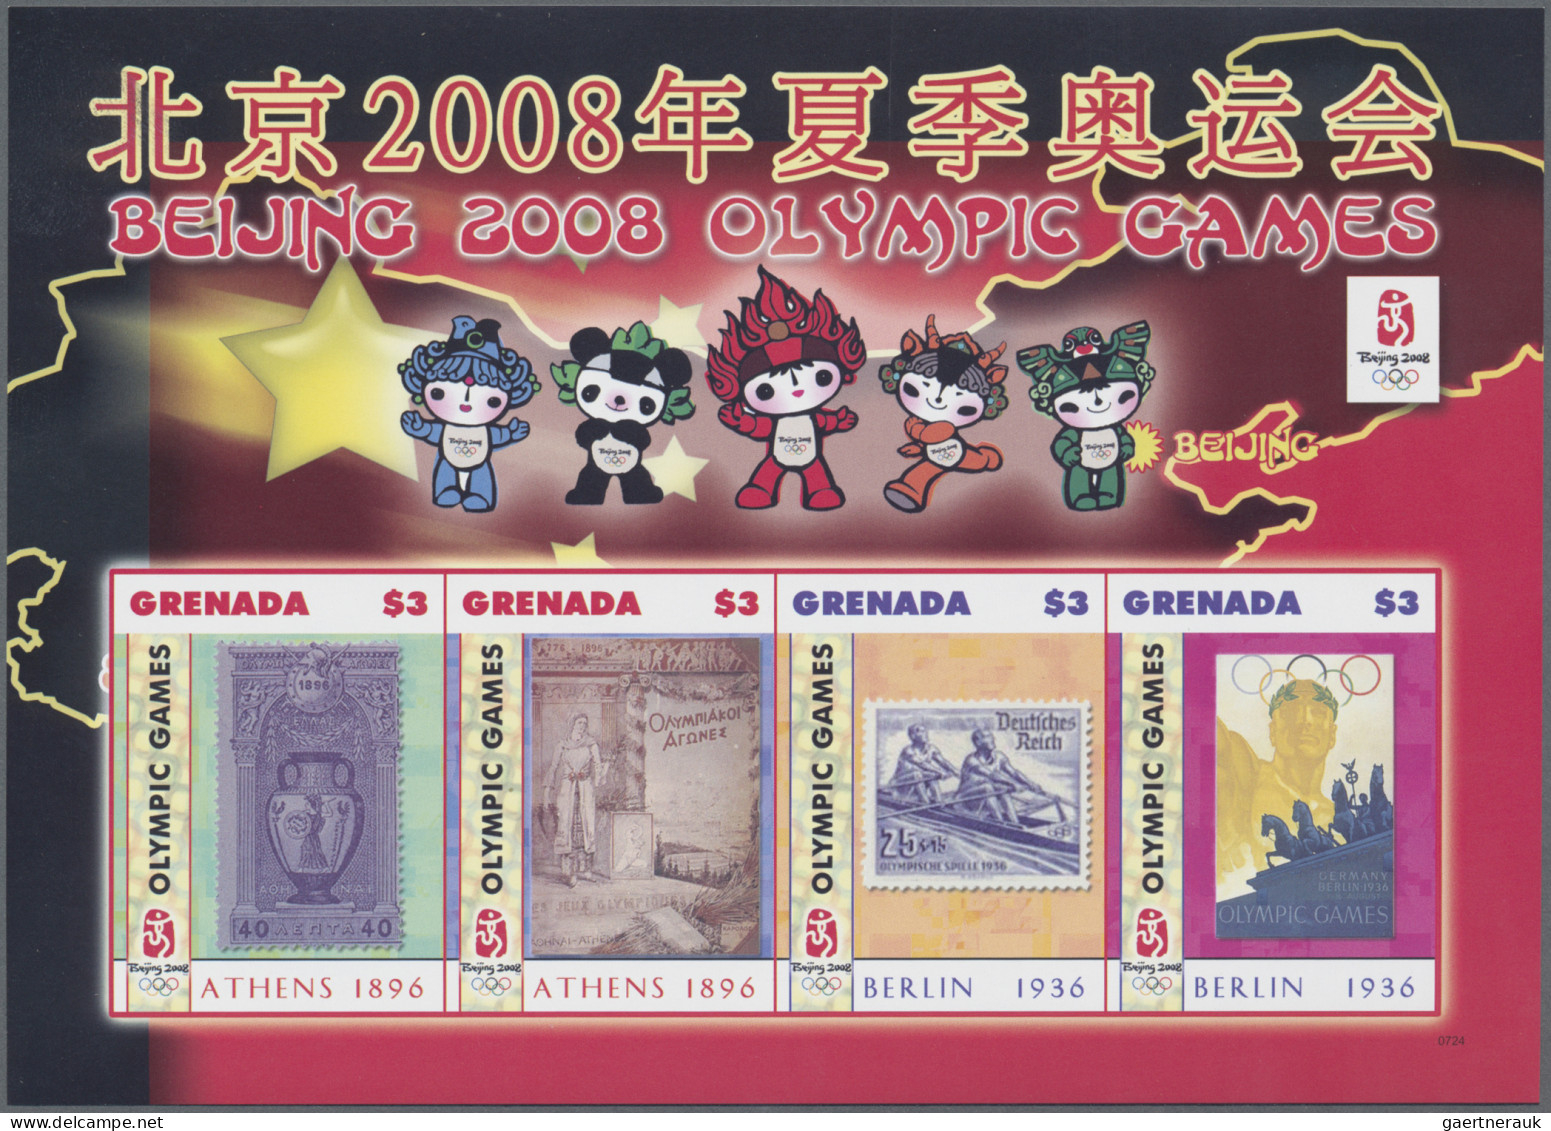 Grenada: 2000/2016. Collection containing 186 IMPERFORATE stamps (inclusive many